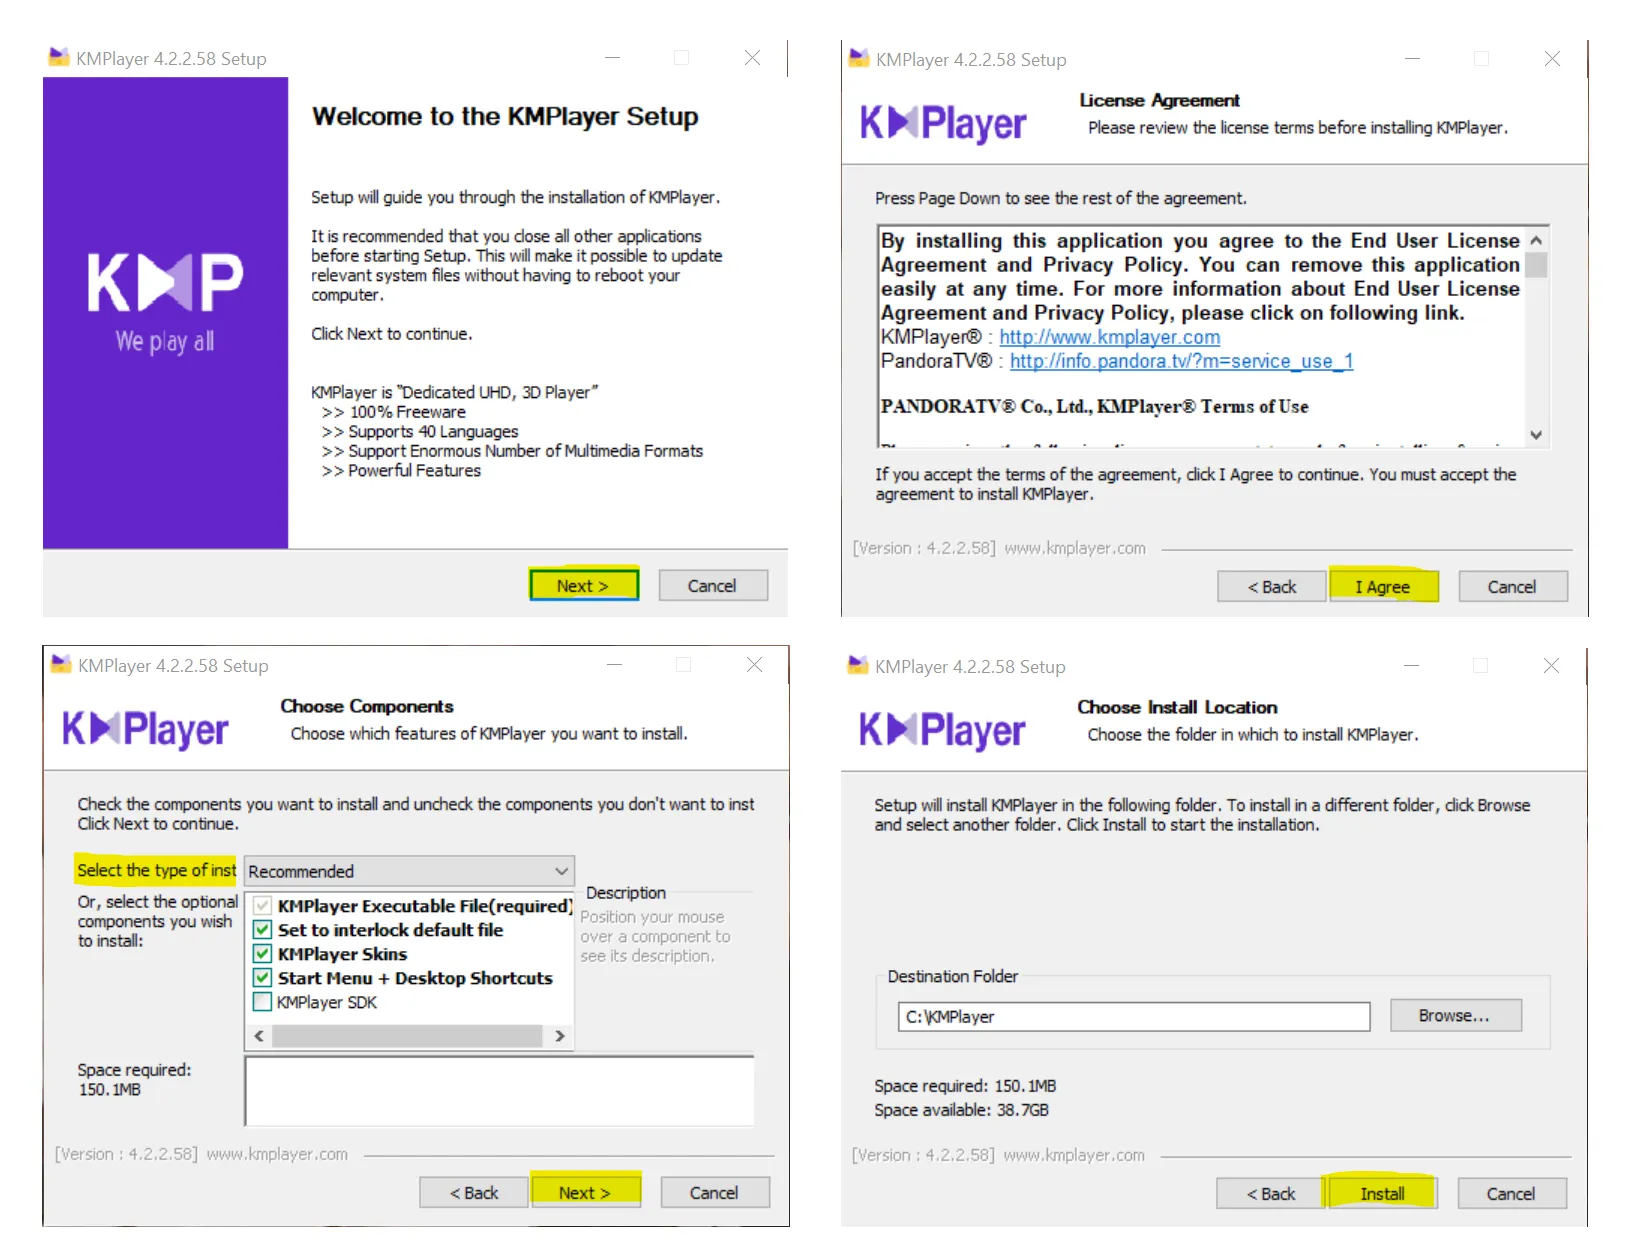 Installation Process of KMPlayer